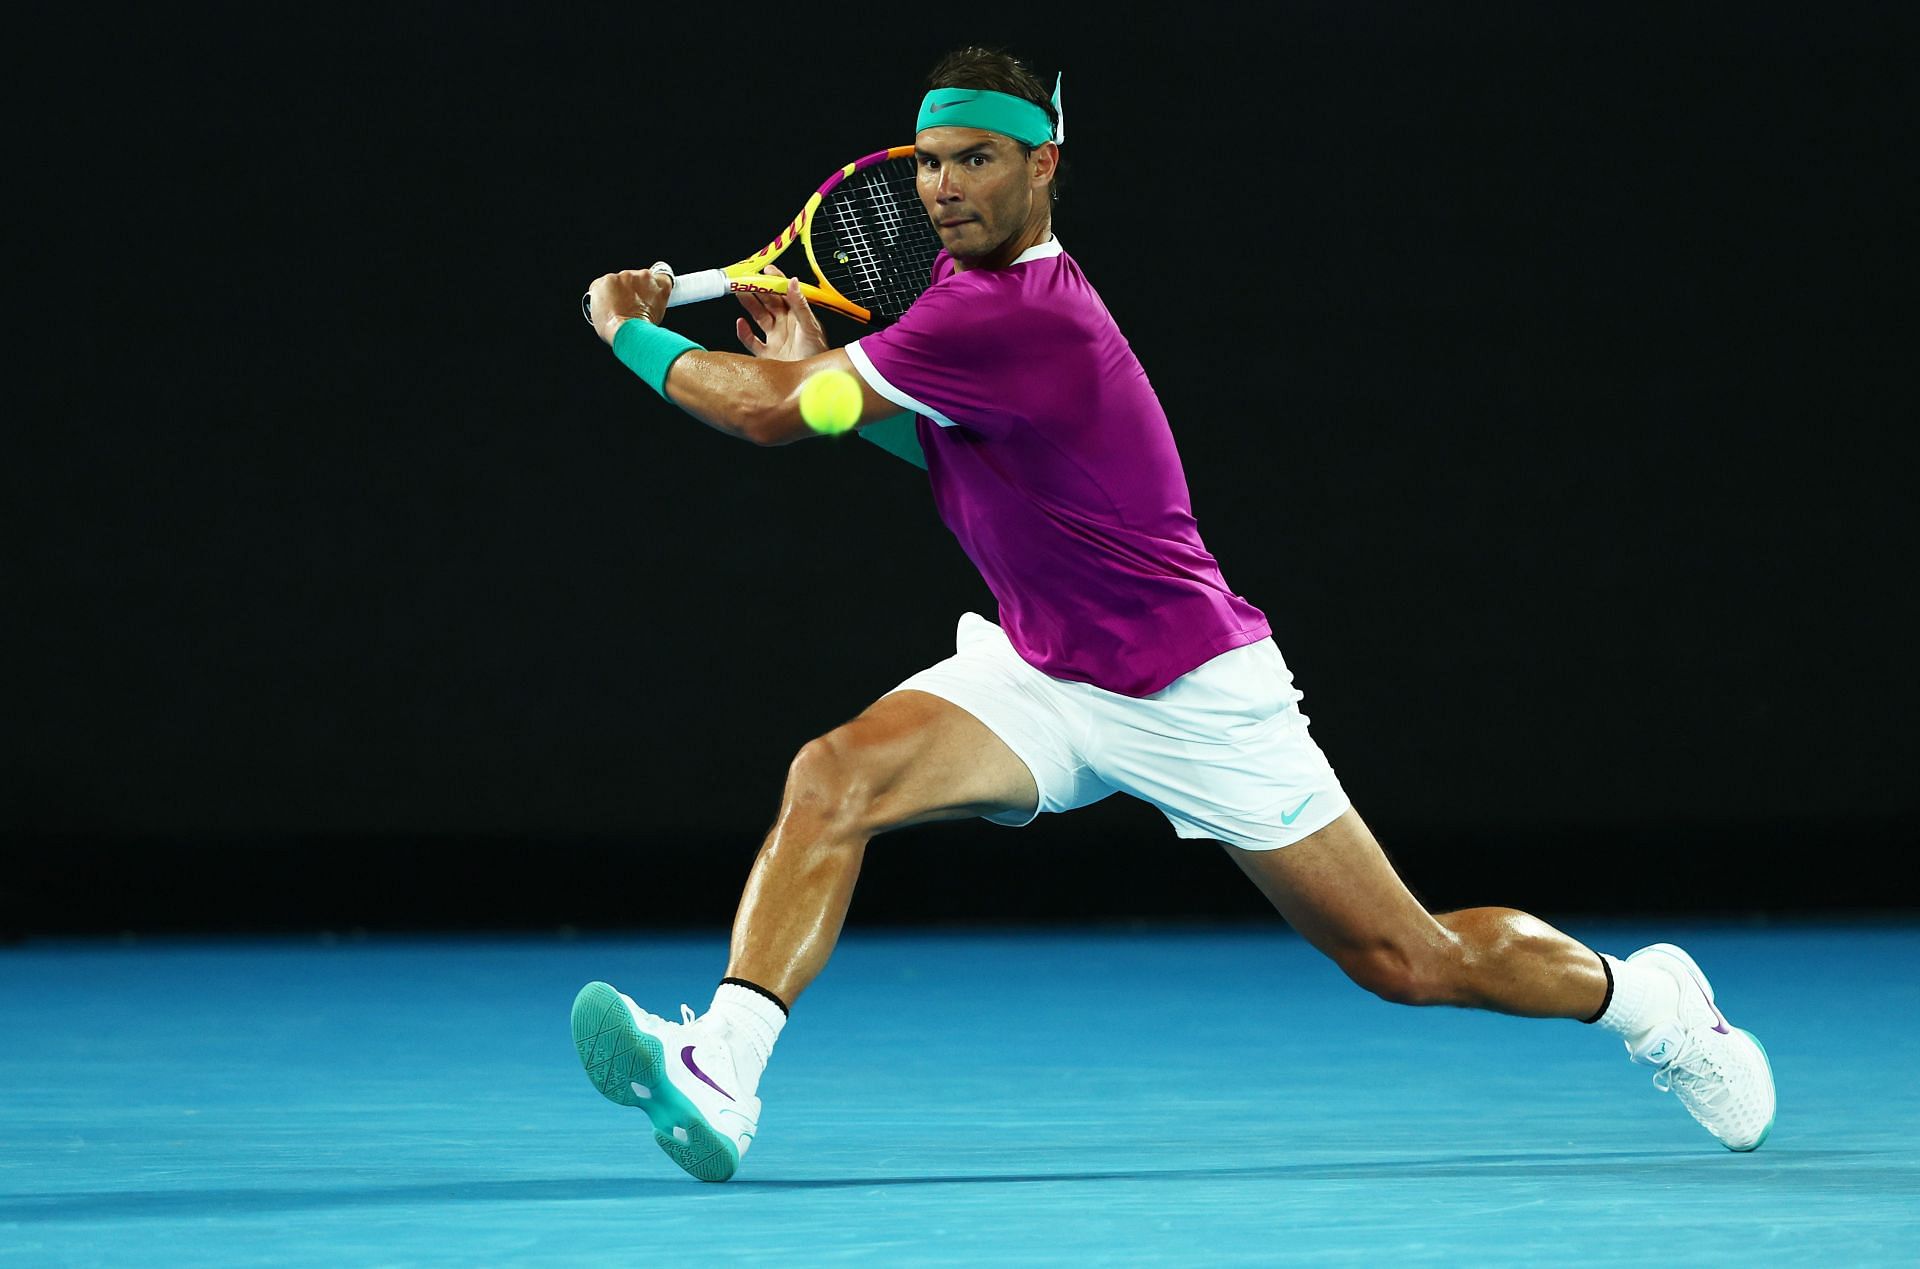 Rafael Nadal is the defending champion at the 2023 Australian Open